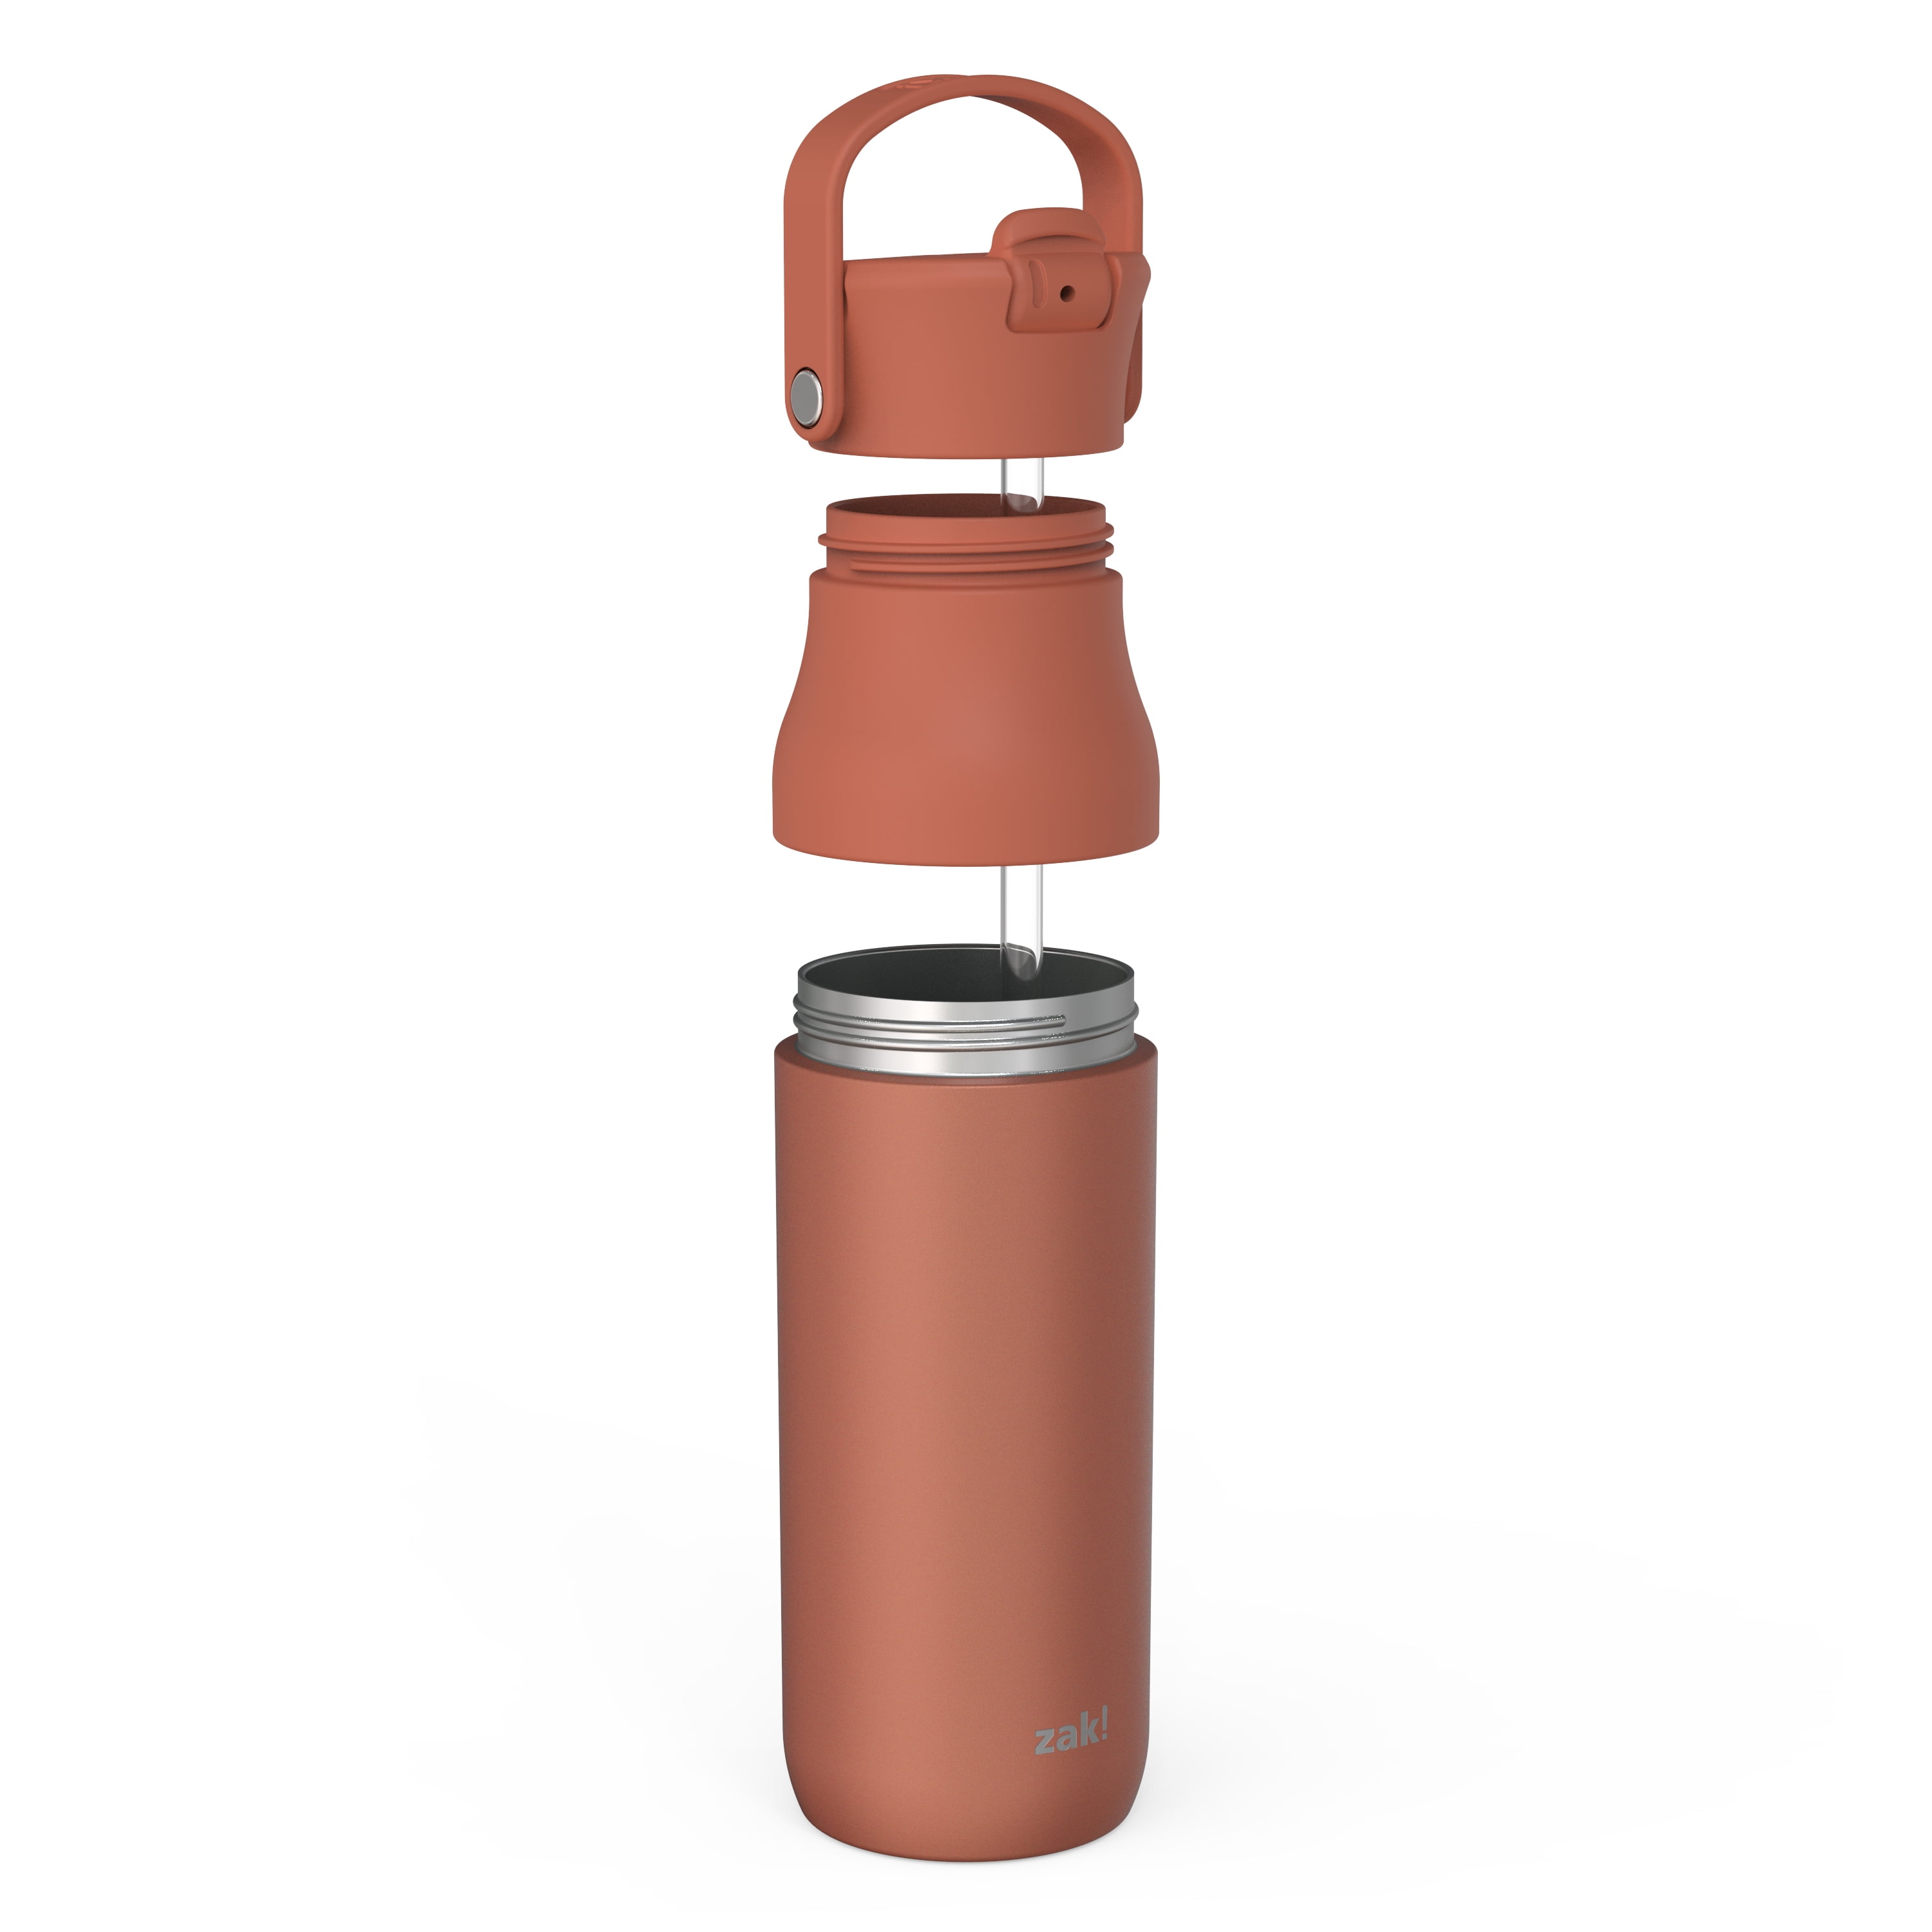  Zak Designs Water Bottle for Travel and At Home, 19 oz Vacuum  Insulated Stainless Steel with Locking Spout Cover, Built-In Carrying Loop,  Leak-Proof Design (Daisies): Home & Kitchen